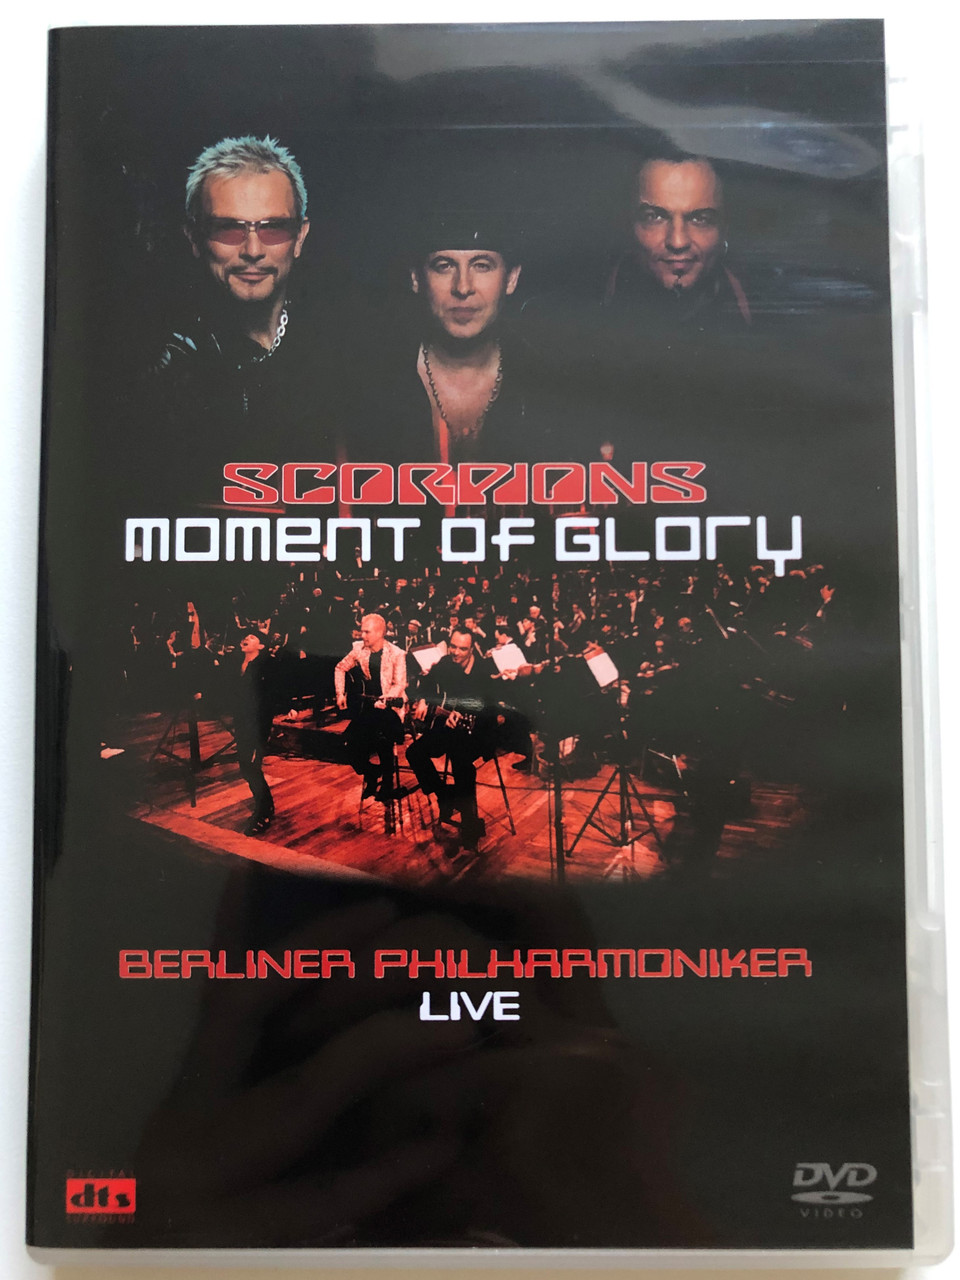 Scorpions - Moment of Glory DVD 2000 Berliner Philharmoniker LIVE /  Conducted by Christian Kolonovits / Directed by Pit Weyrich / Eagle Rock  Entertainment - bibleinmylanguage